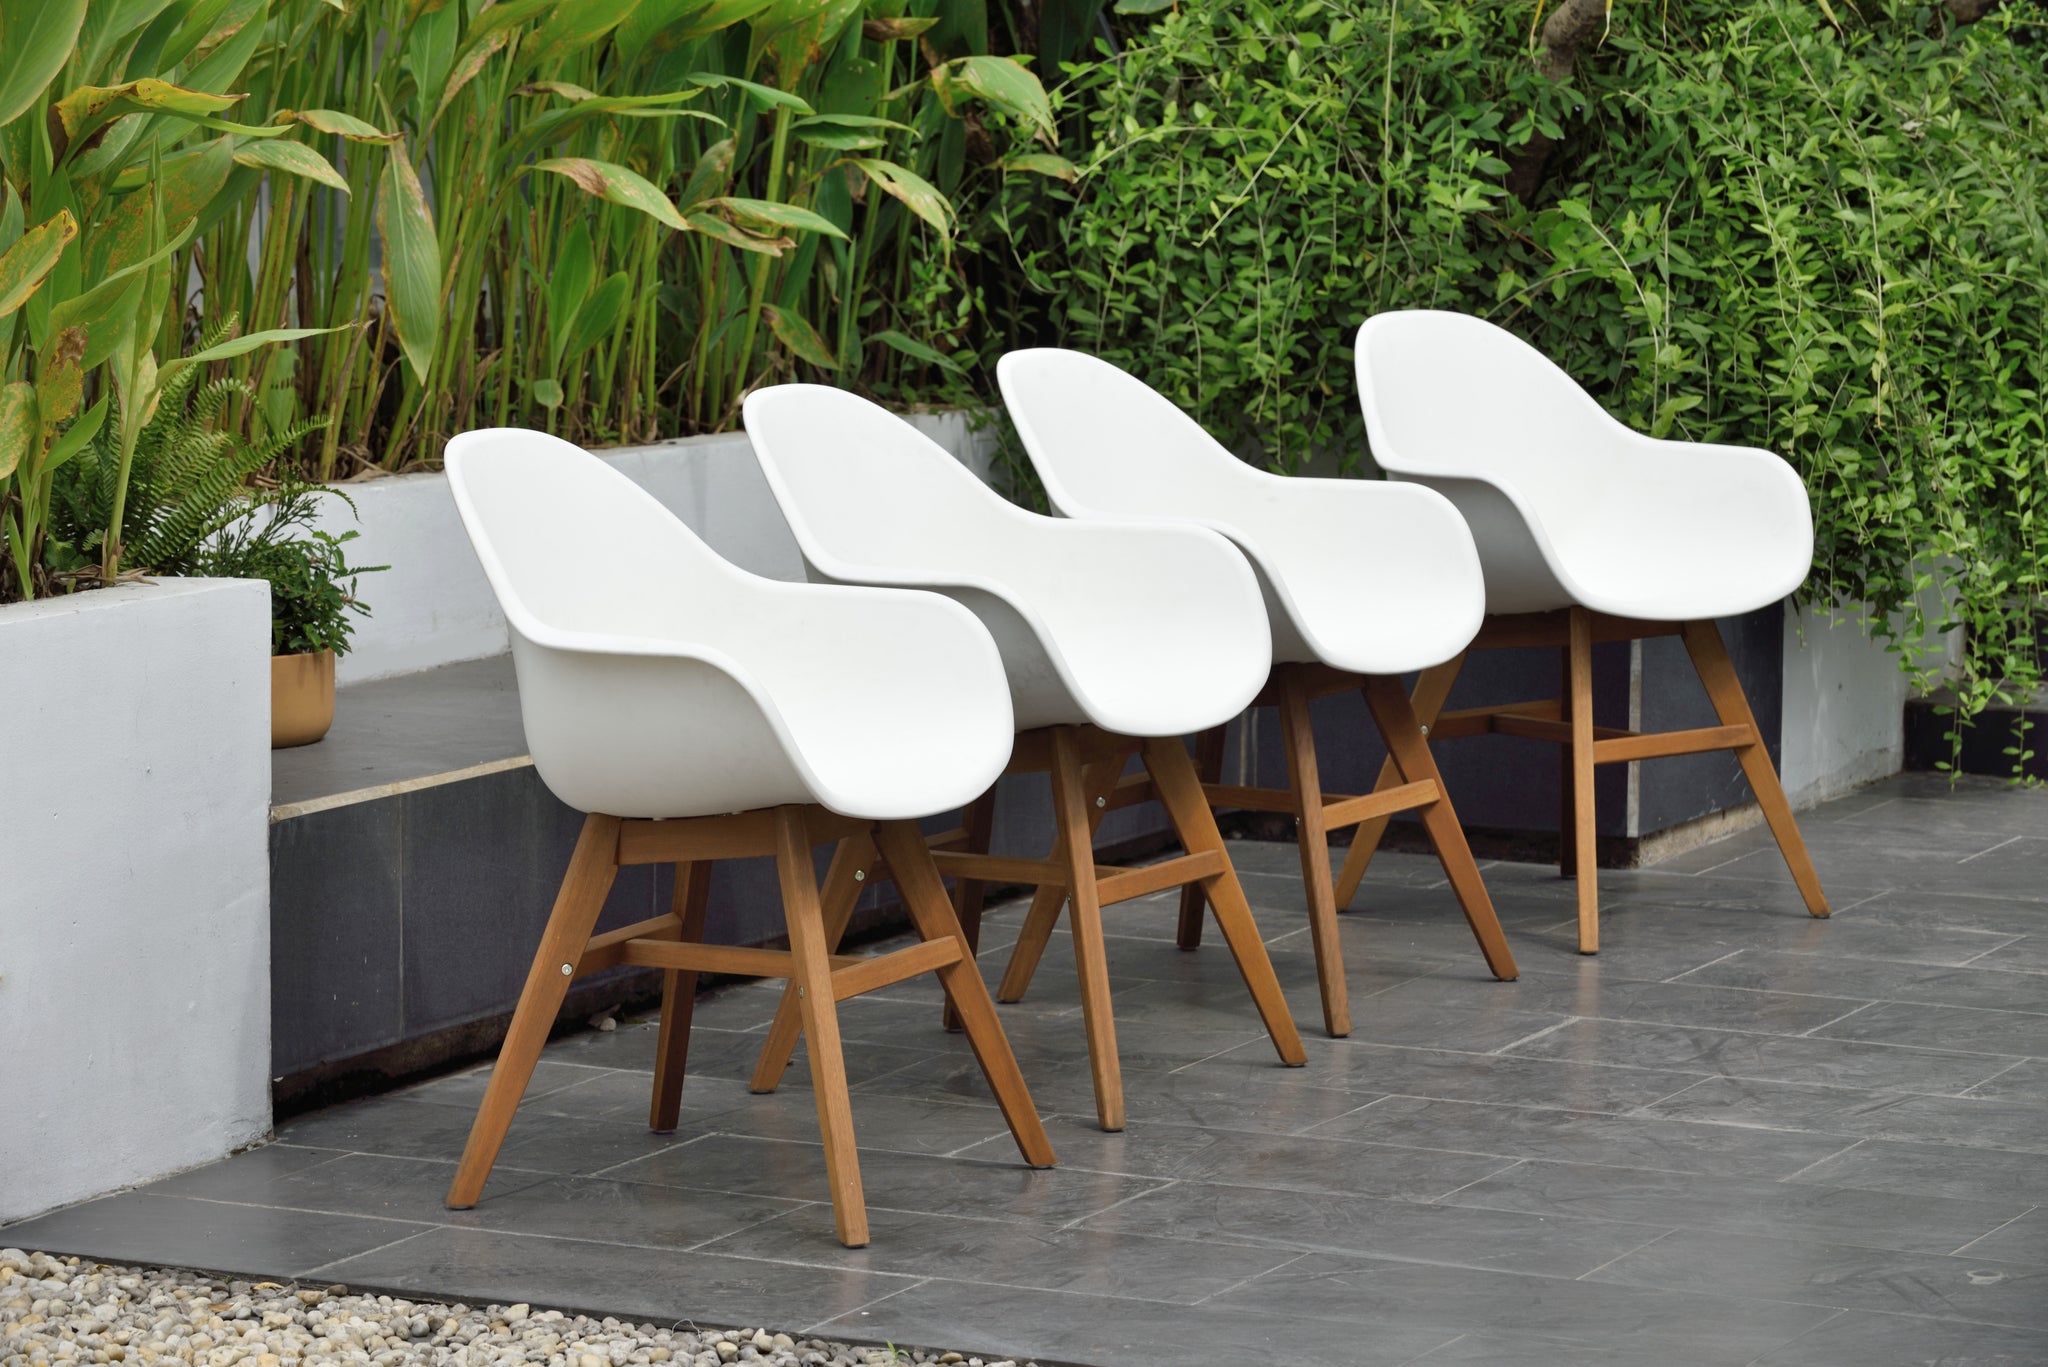 Concarneu Arm Outdoor Dining Chair - 4PC